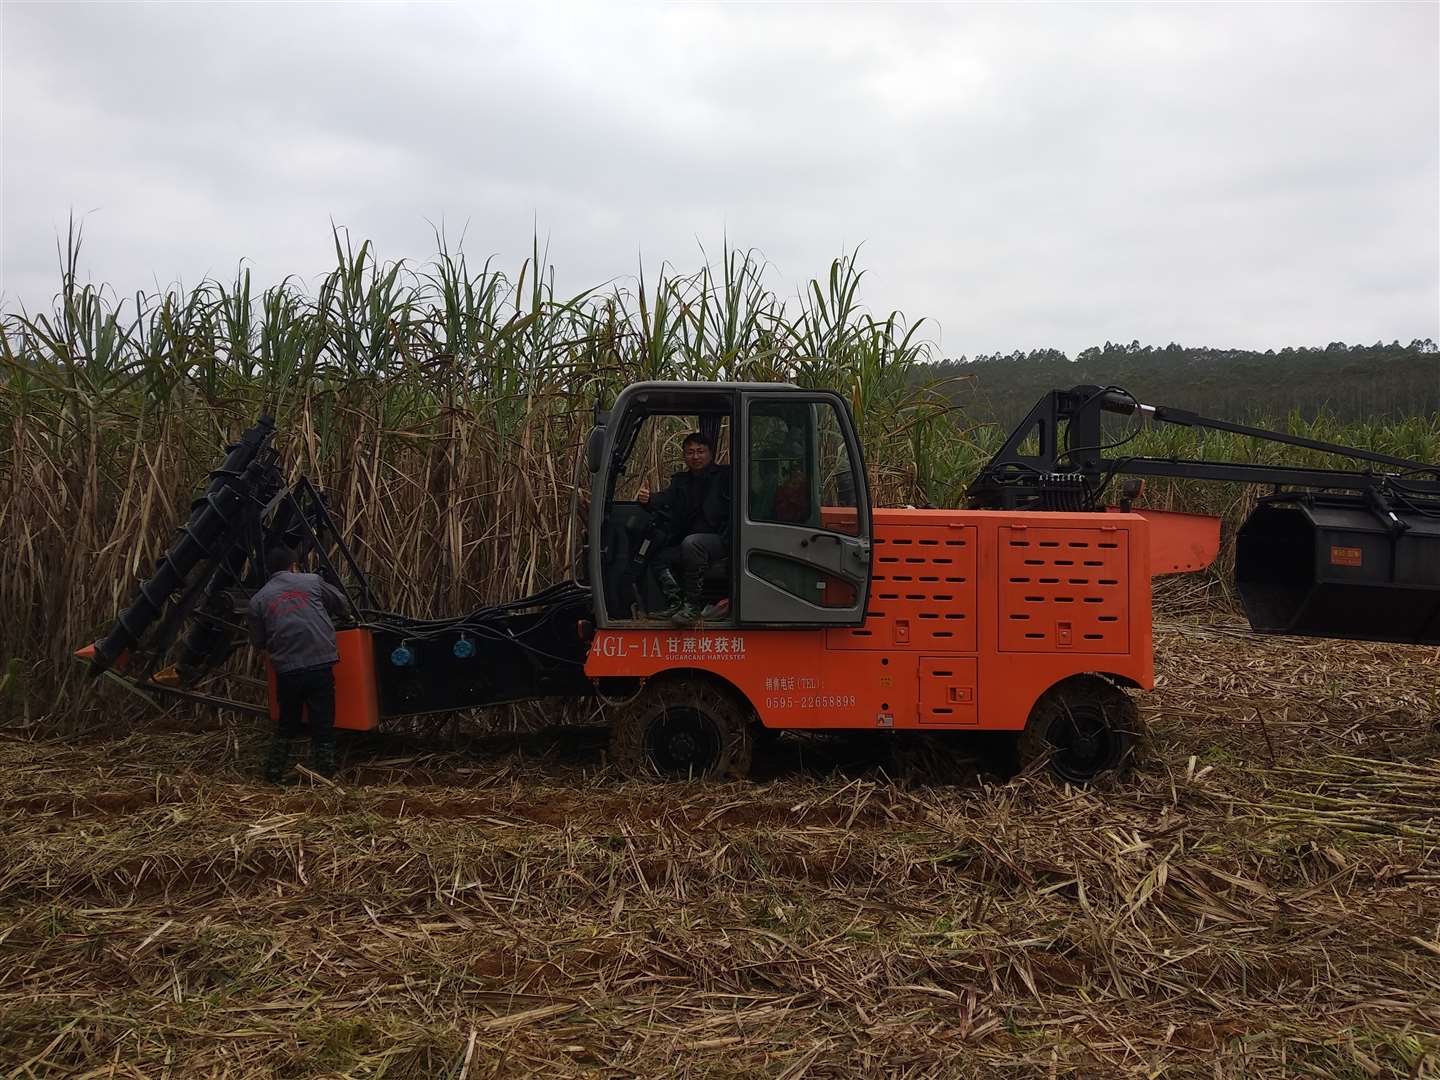 JingGong 4GL-1A sugarcane harvester in Philippines